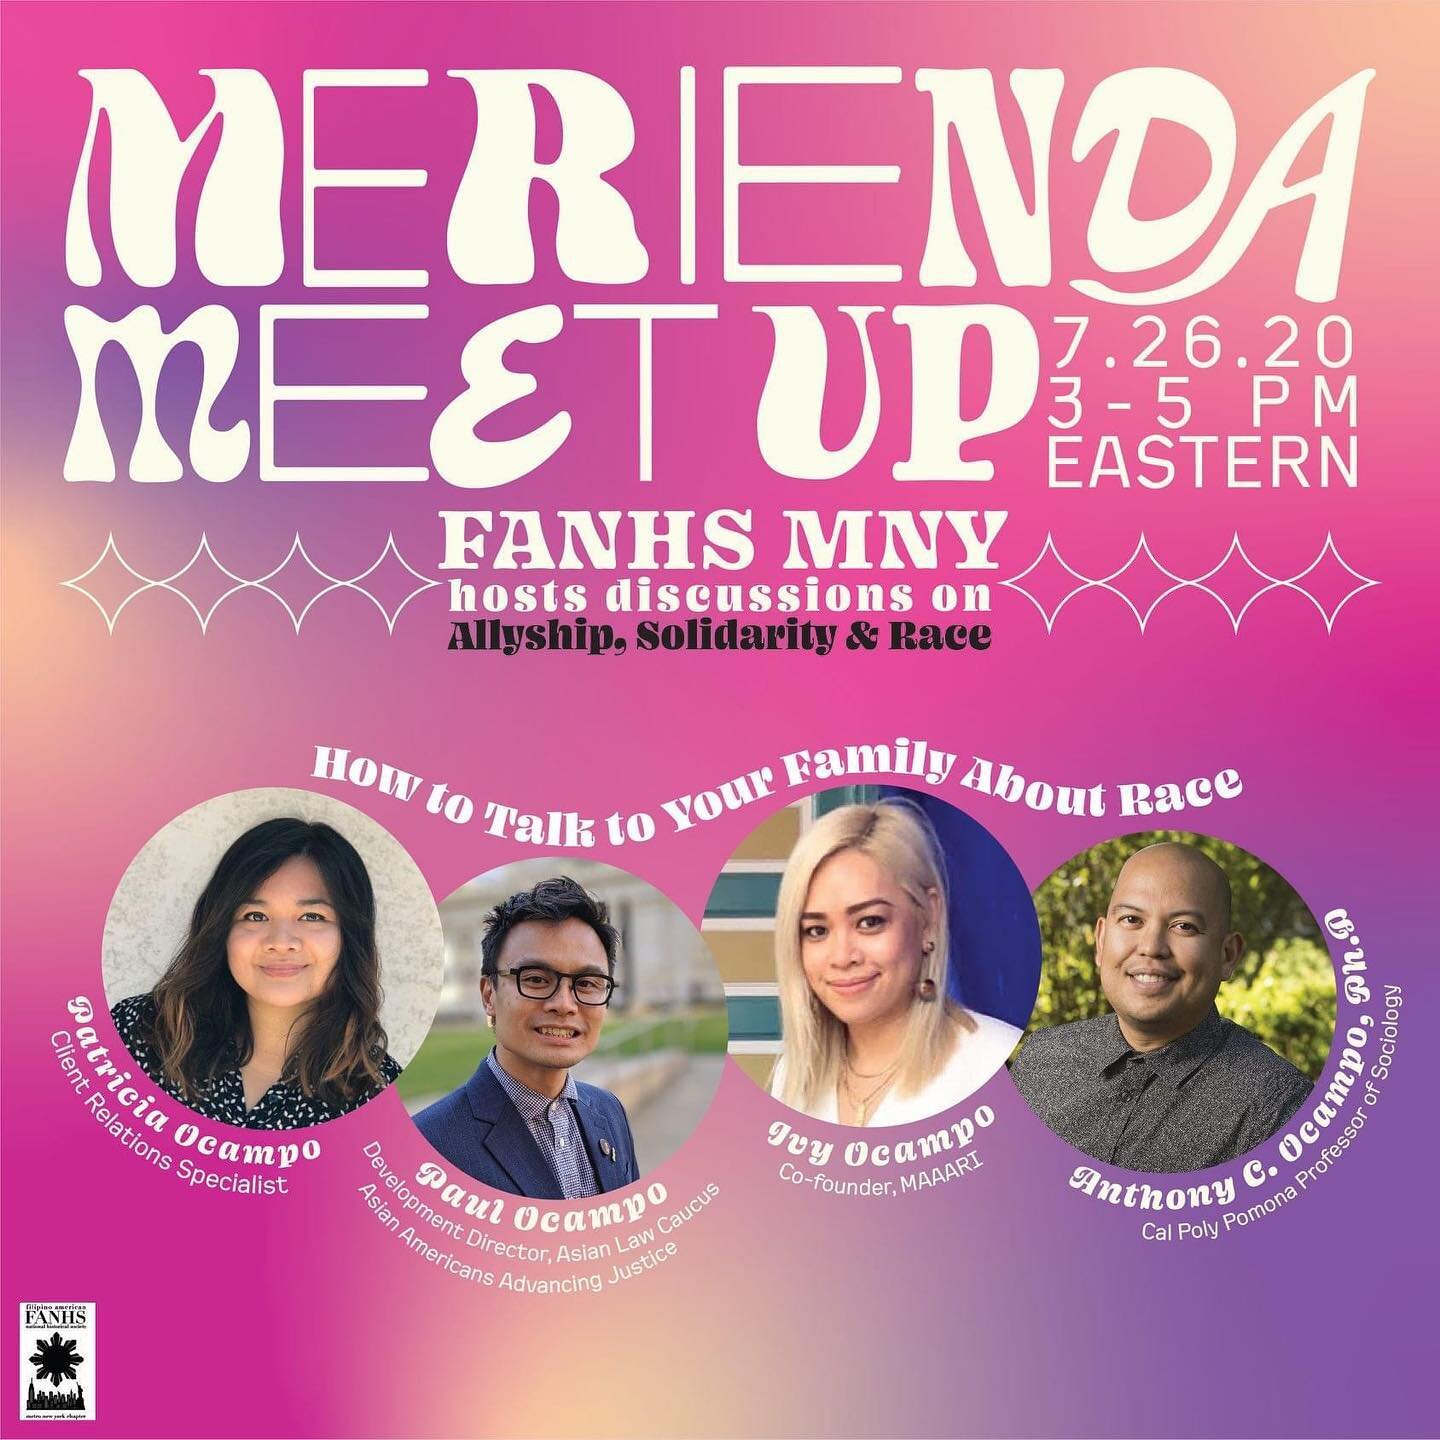 FANHS MNY Presents: Merienda Meetup 2.0 Speaker Introductions!

&quot;A Conversation on Race and Anti-Blackness: Filipino Family Edition&quot; - Ocampo Cousins

How do you talk to family about race, especially when there are so many divergent politic